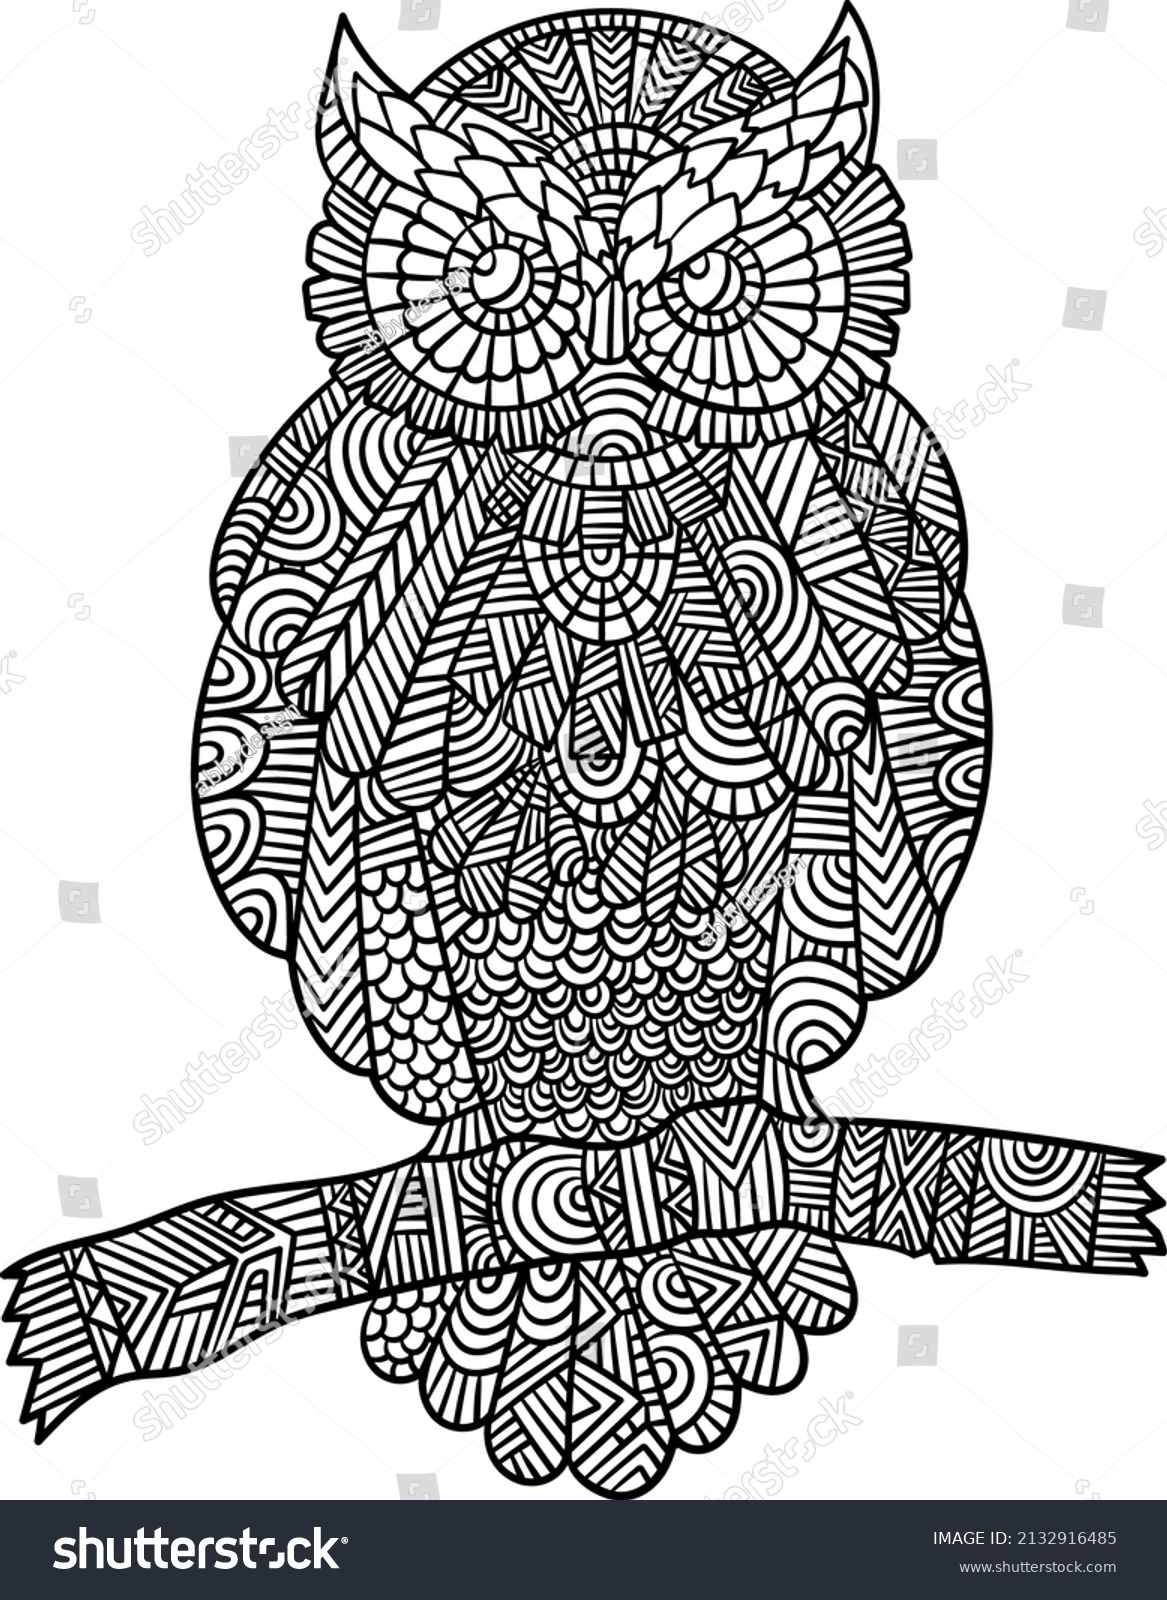 SVG of Owl Mandala Coloring Pages for Adults svg